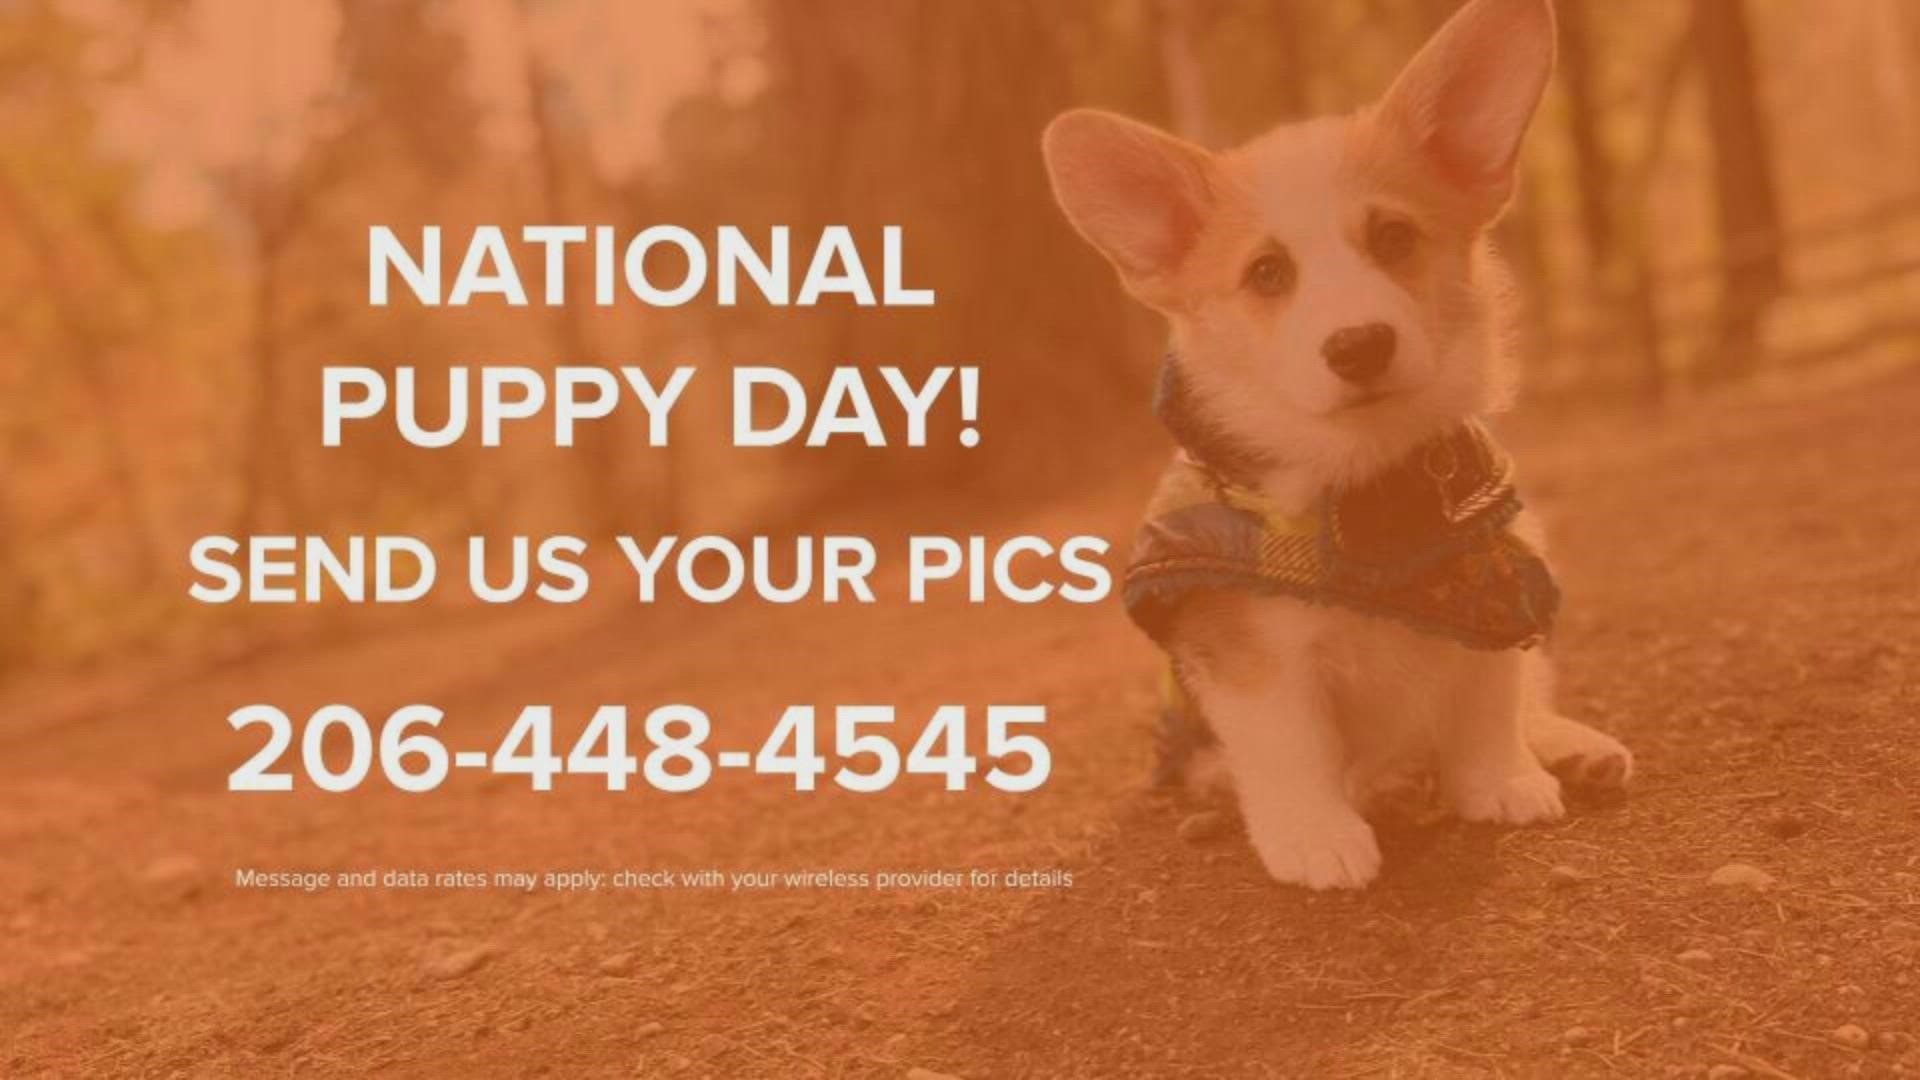 Wednesday is National Puppy Day!